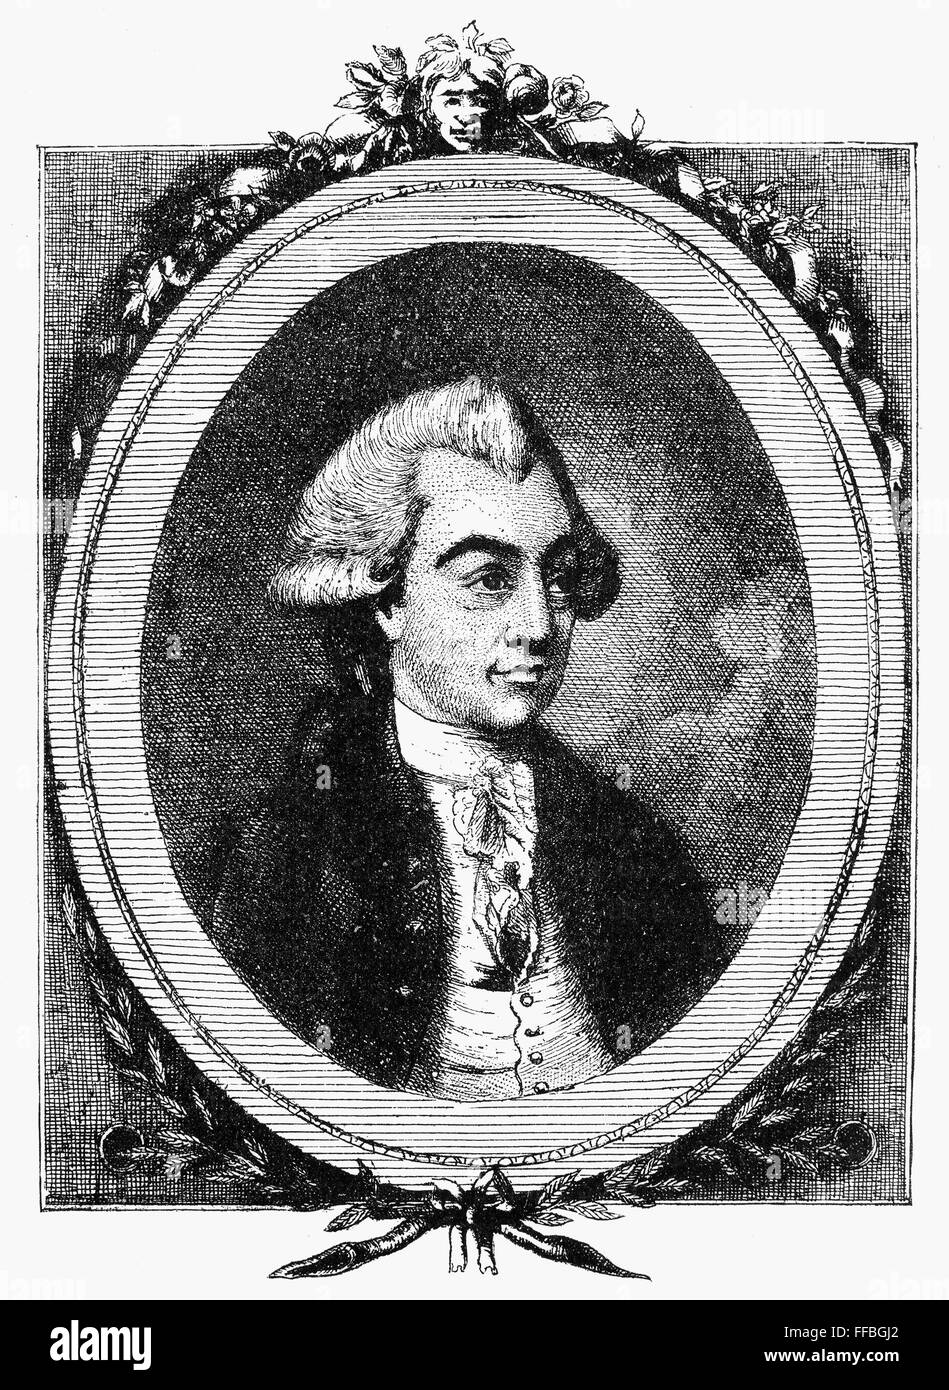 WILLS HILL (1718-1793). /nViscount of Hillsborough. British politician and colonial administrator. Line engraving, English, 18th century. Stock Photo